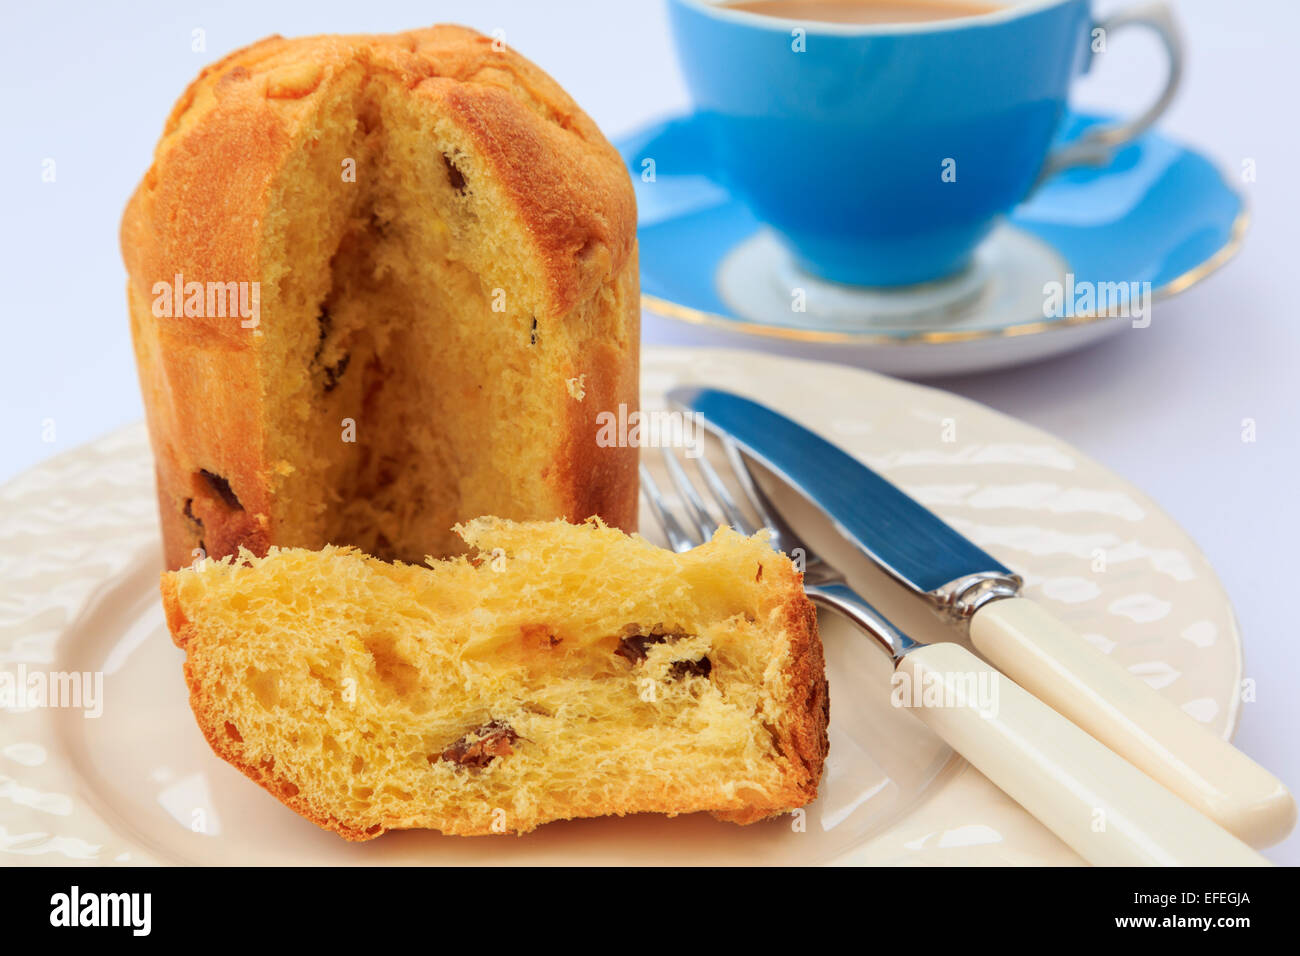 A slice of Panettone Italian Christmas fruit bread cake on a plate for afternoon tea with a blue teacup and saucer on a table top. England UK Stock Photo